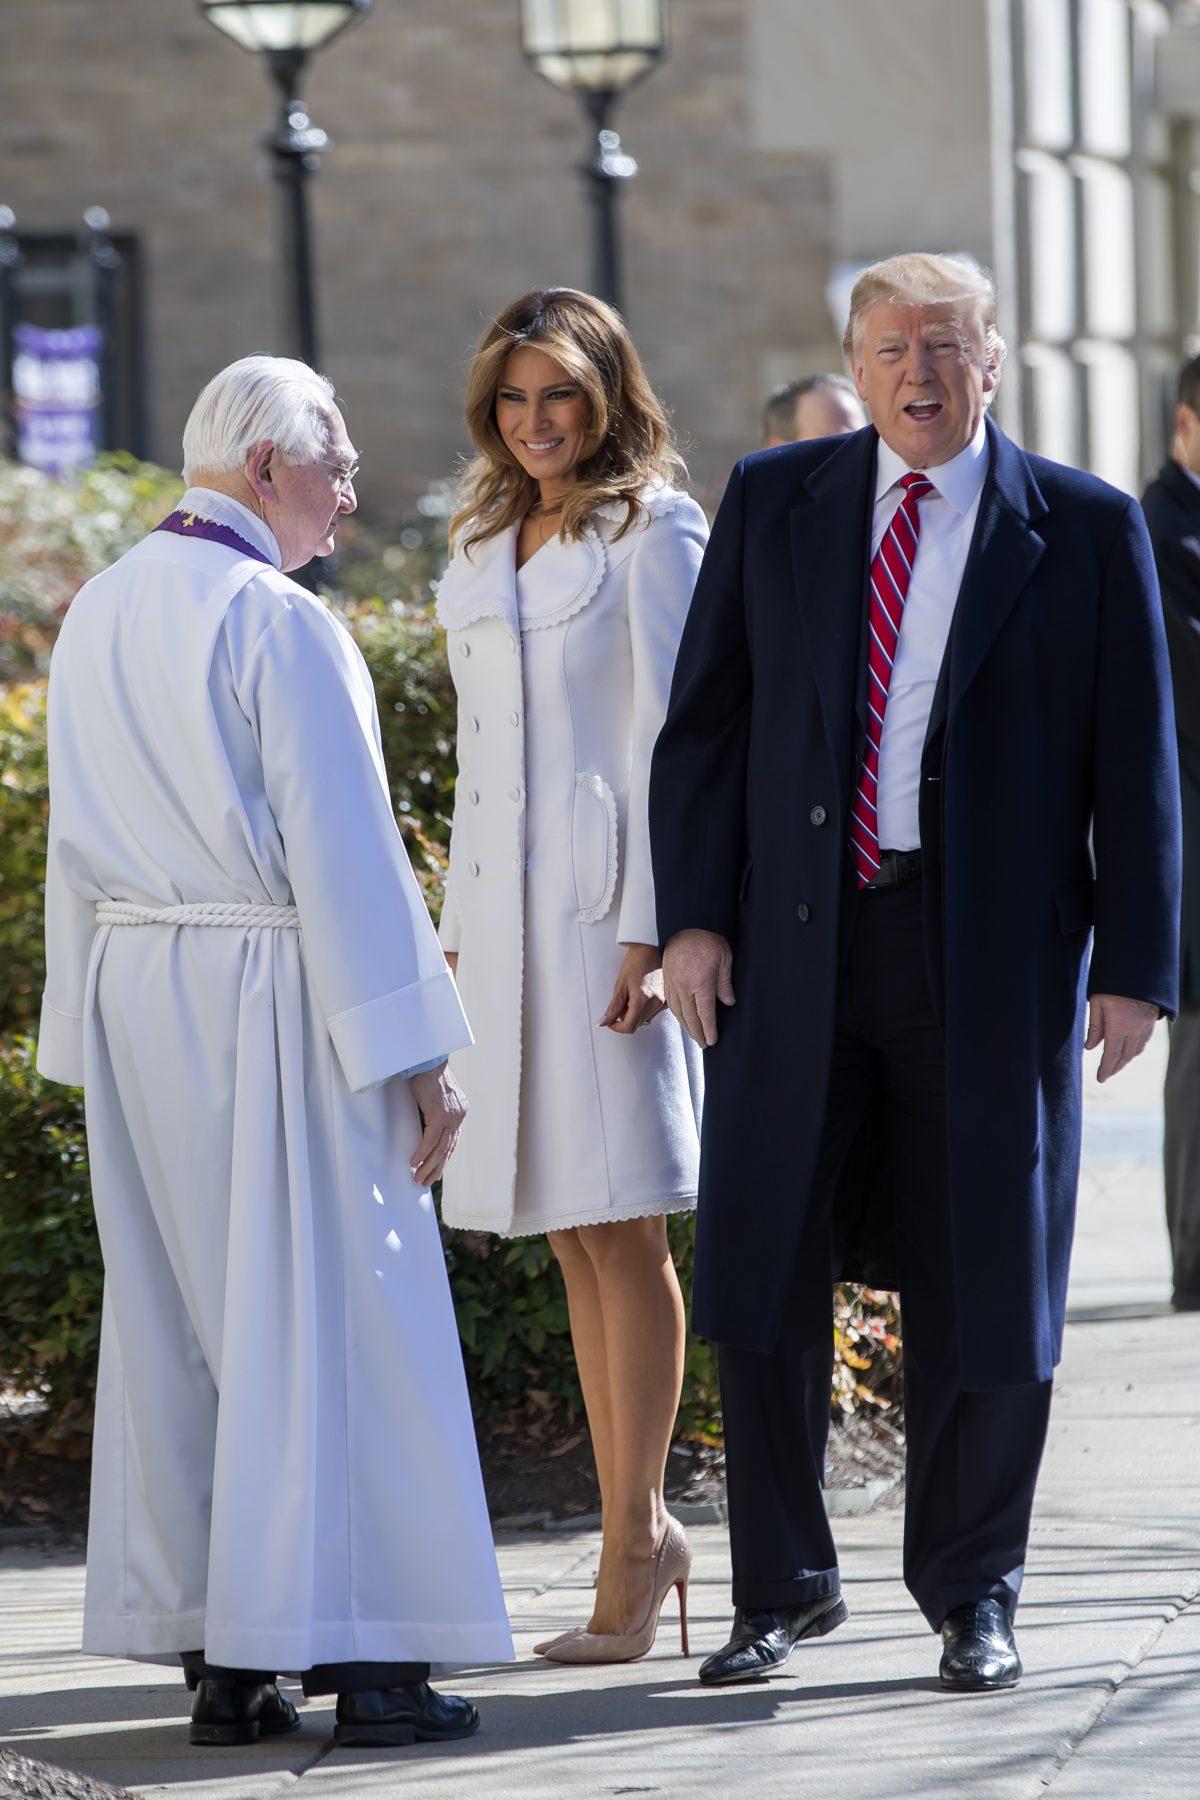 President Donald J. Trump (R) and first lady Melania Trump (C) are greeted by Reverend W. Bruce McPherson (L) as they arrive to attend services at St. John's Episcopal Church in Washington, on March 17, 2019. (Eric Lesser-Pool/Getty Images)